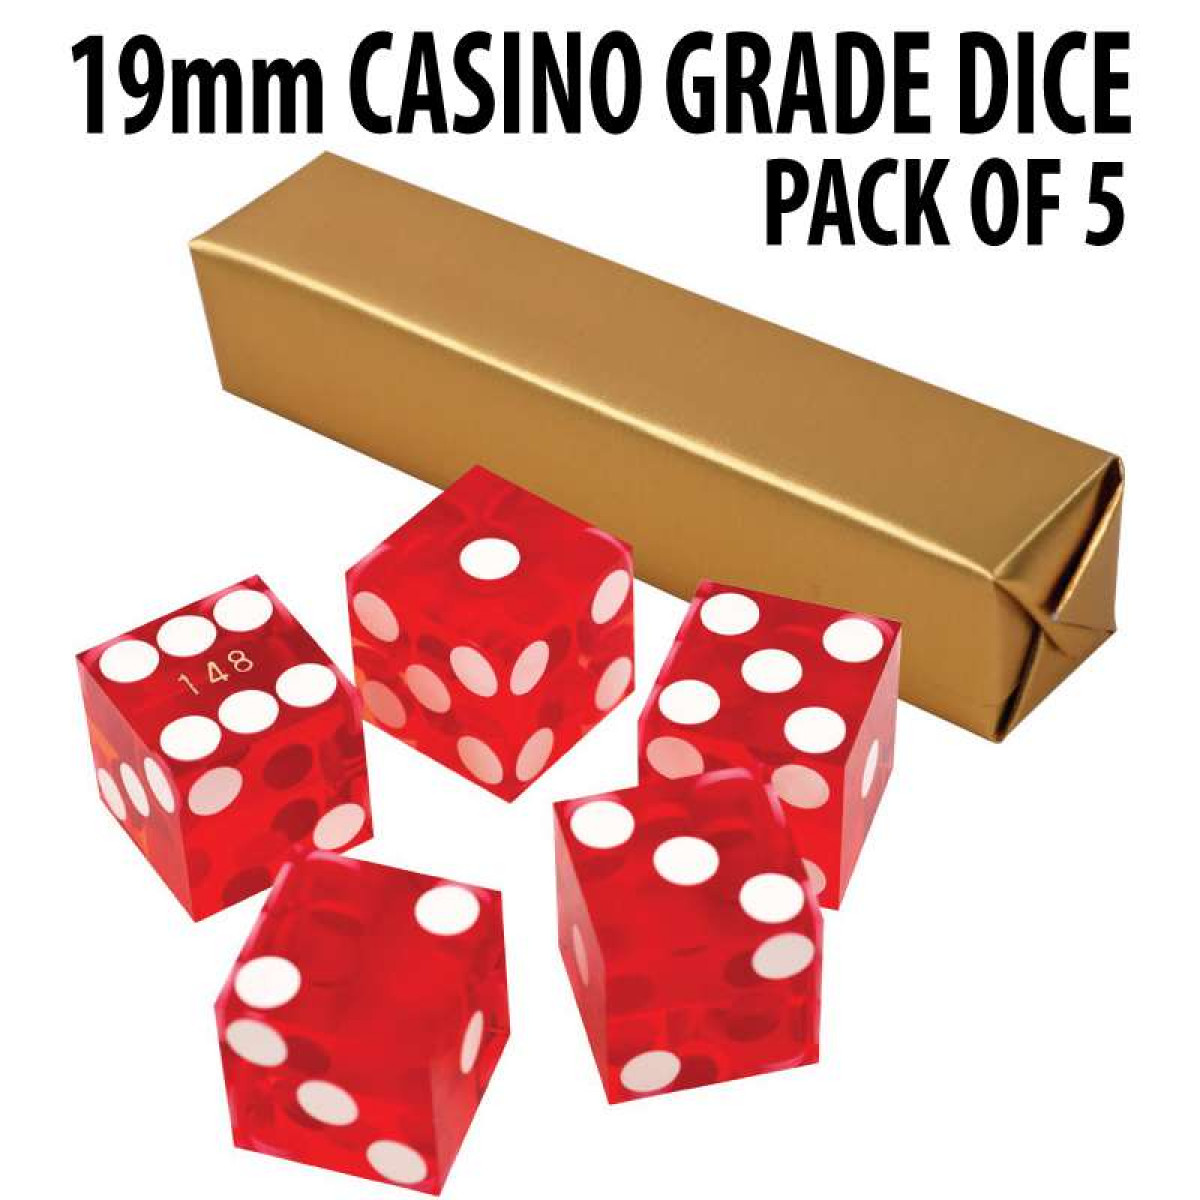 Full Sets Grade AAA Craps Dice with Sharp Razor Edges and Matching Serial Numbers Cyber-Deals Precision Casino Dice